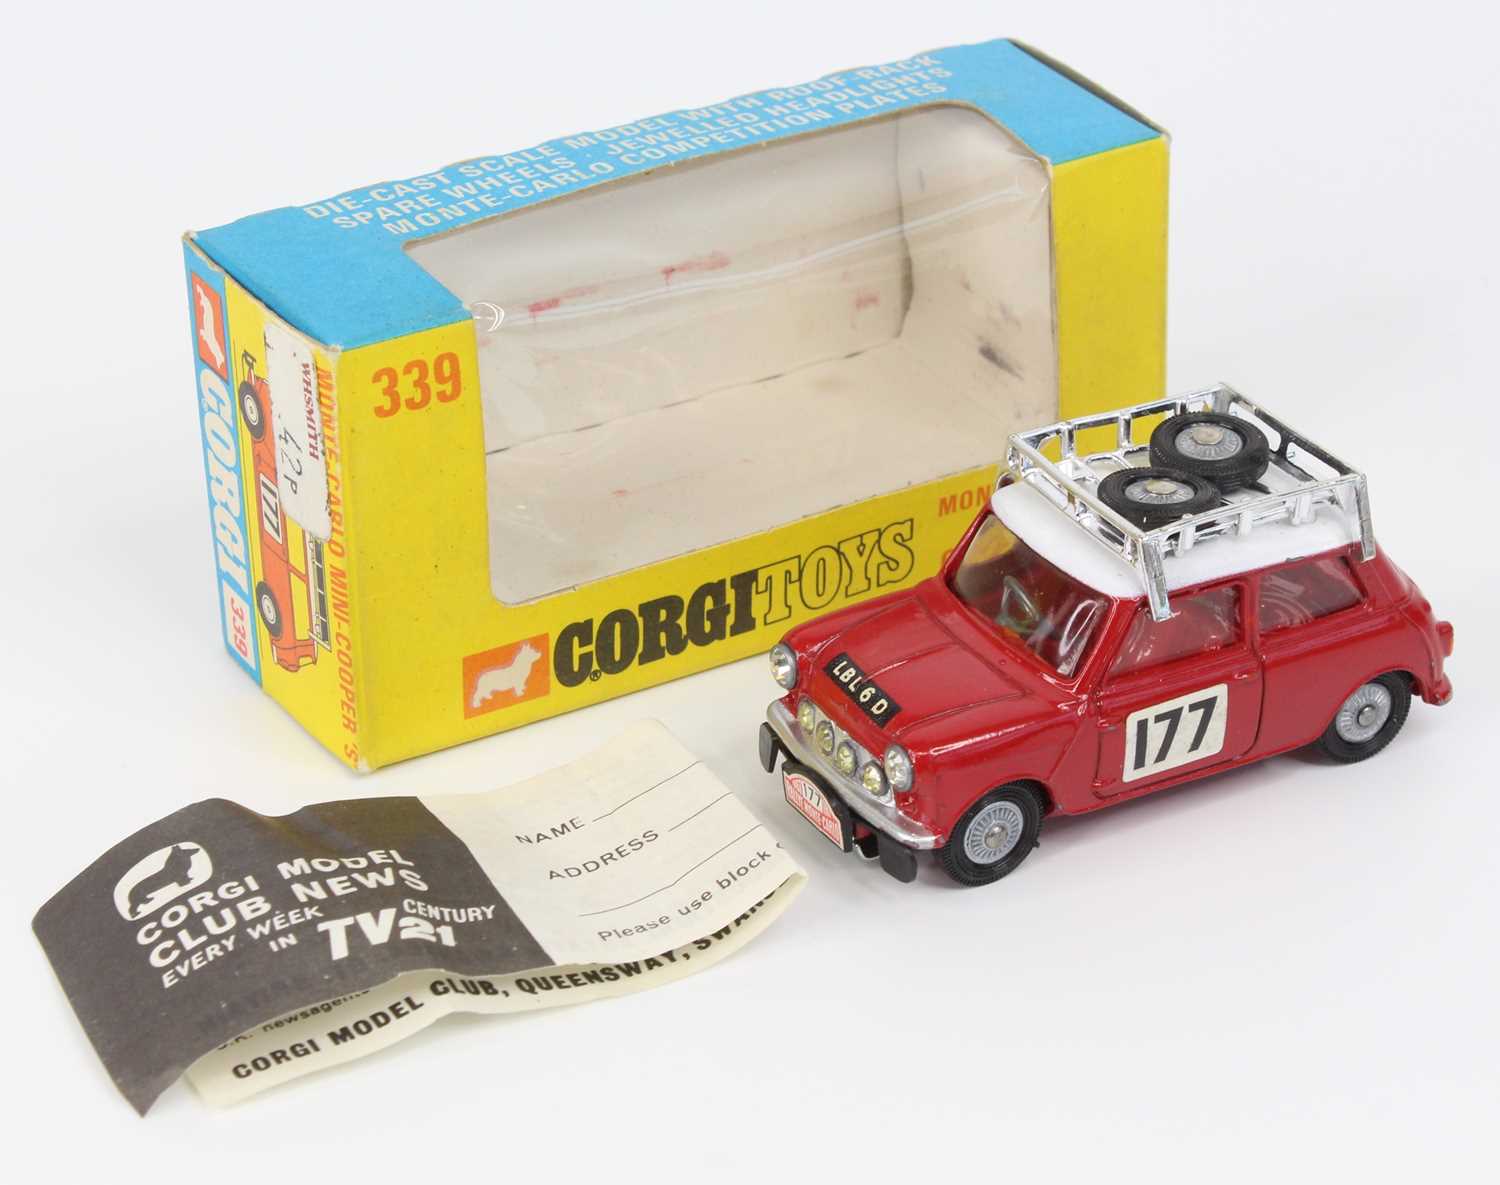 Corgi Toys, 339 Mini Cooper S Monte Carlo Winner, red body with white roof, racing number 177, 2